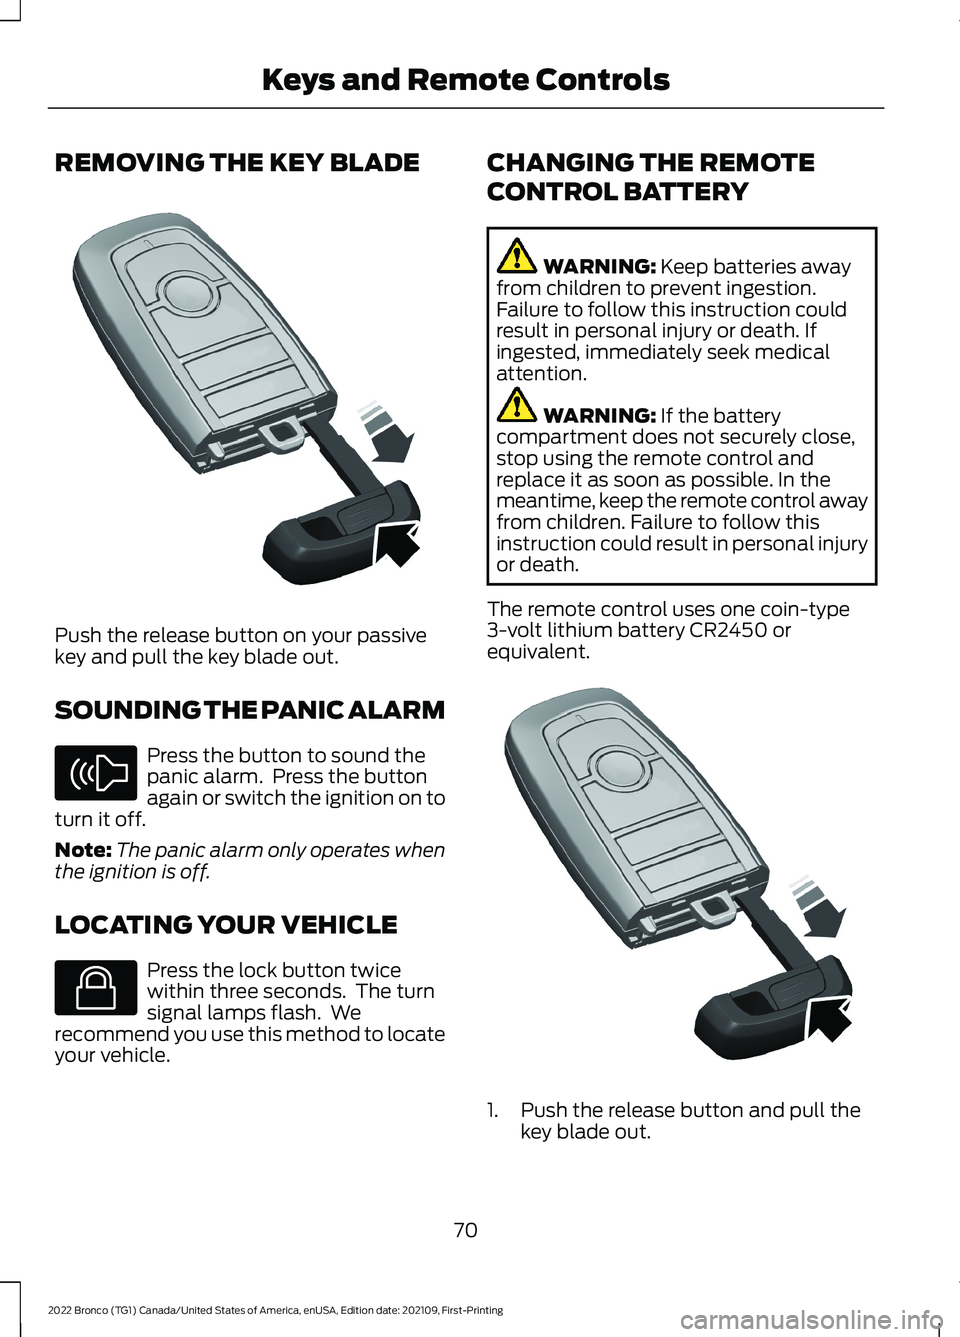 FORD BRONCO 2022  Owners Manual REMOVING THE KEY BLADE
Push the release button on your passivekey and pull the key blade out.
SOUNDING THE PANIC ALARM
Press the button to sound thepanic alarm.  Press the buttonagain or switch the ig